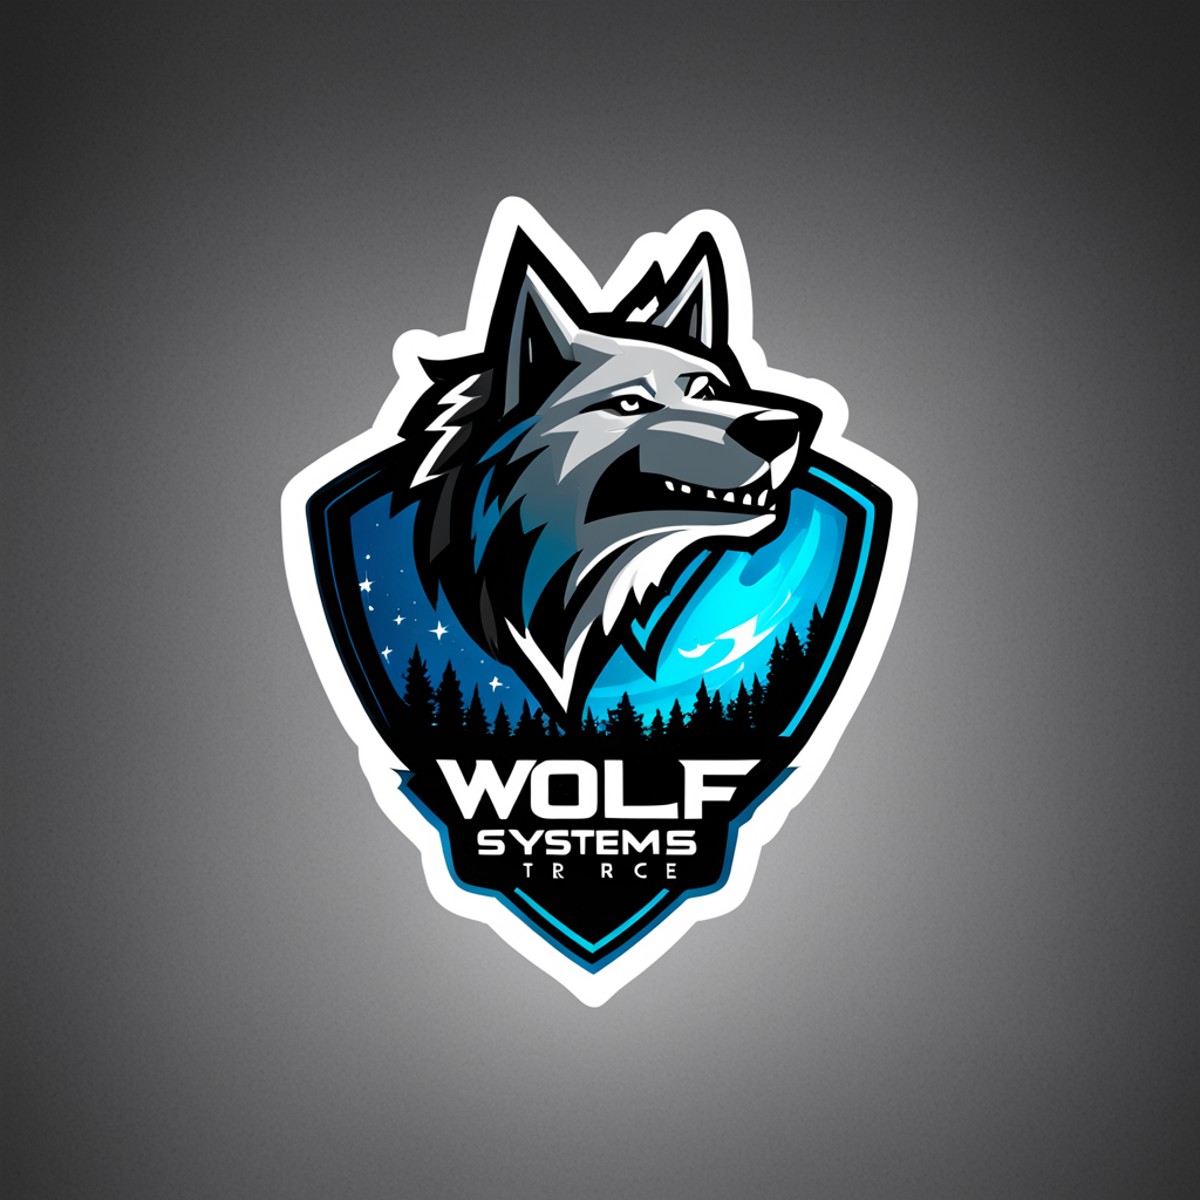 logomkrdsxl, a very cool looking logo , wolf in space,  vector, text "Wolf-Systems",  <lora:logomkrdsxl:1>, best quality, ...